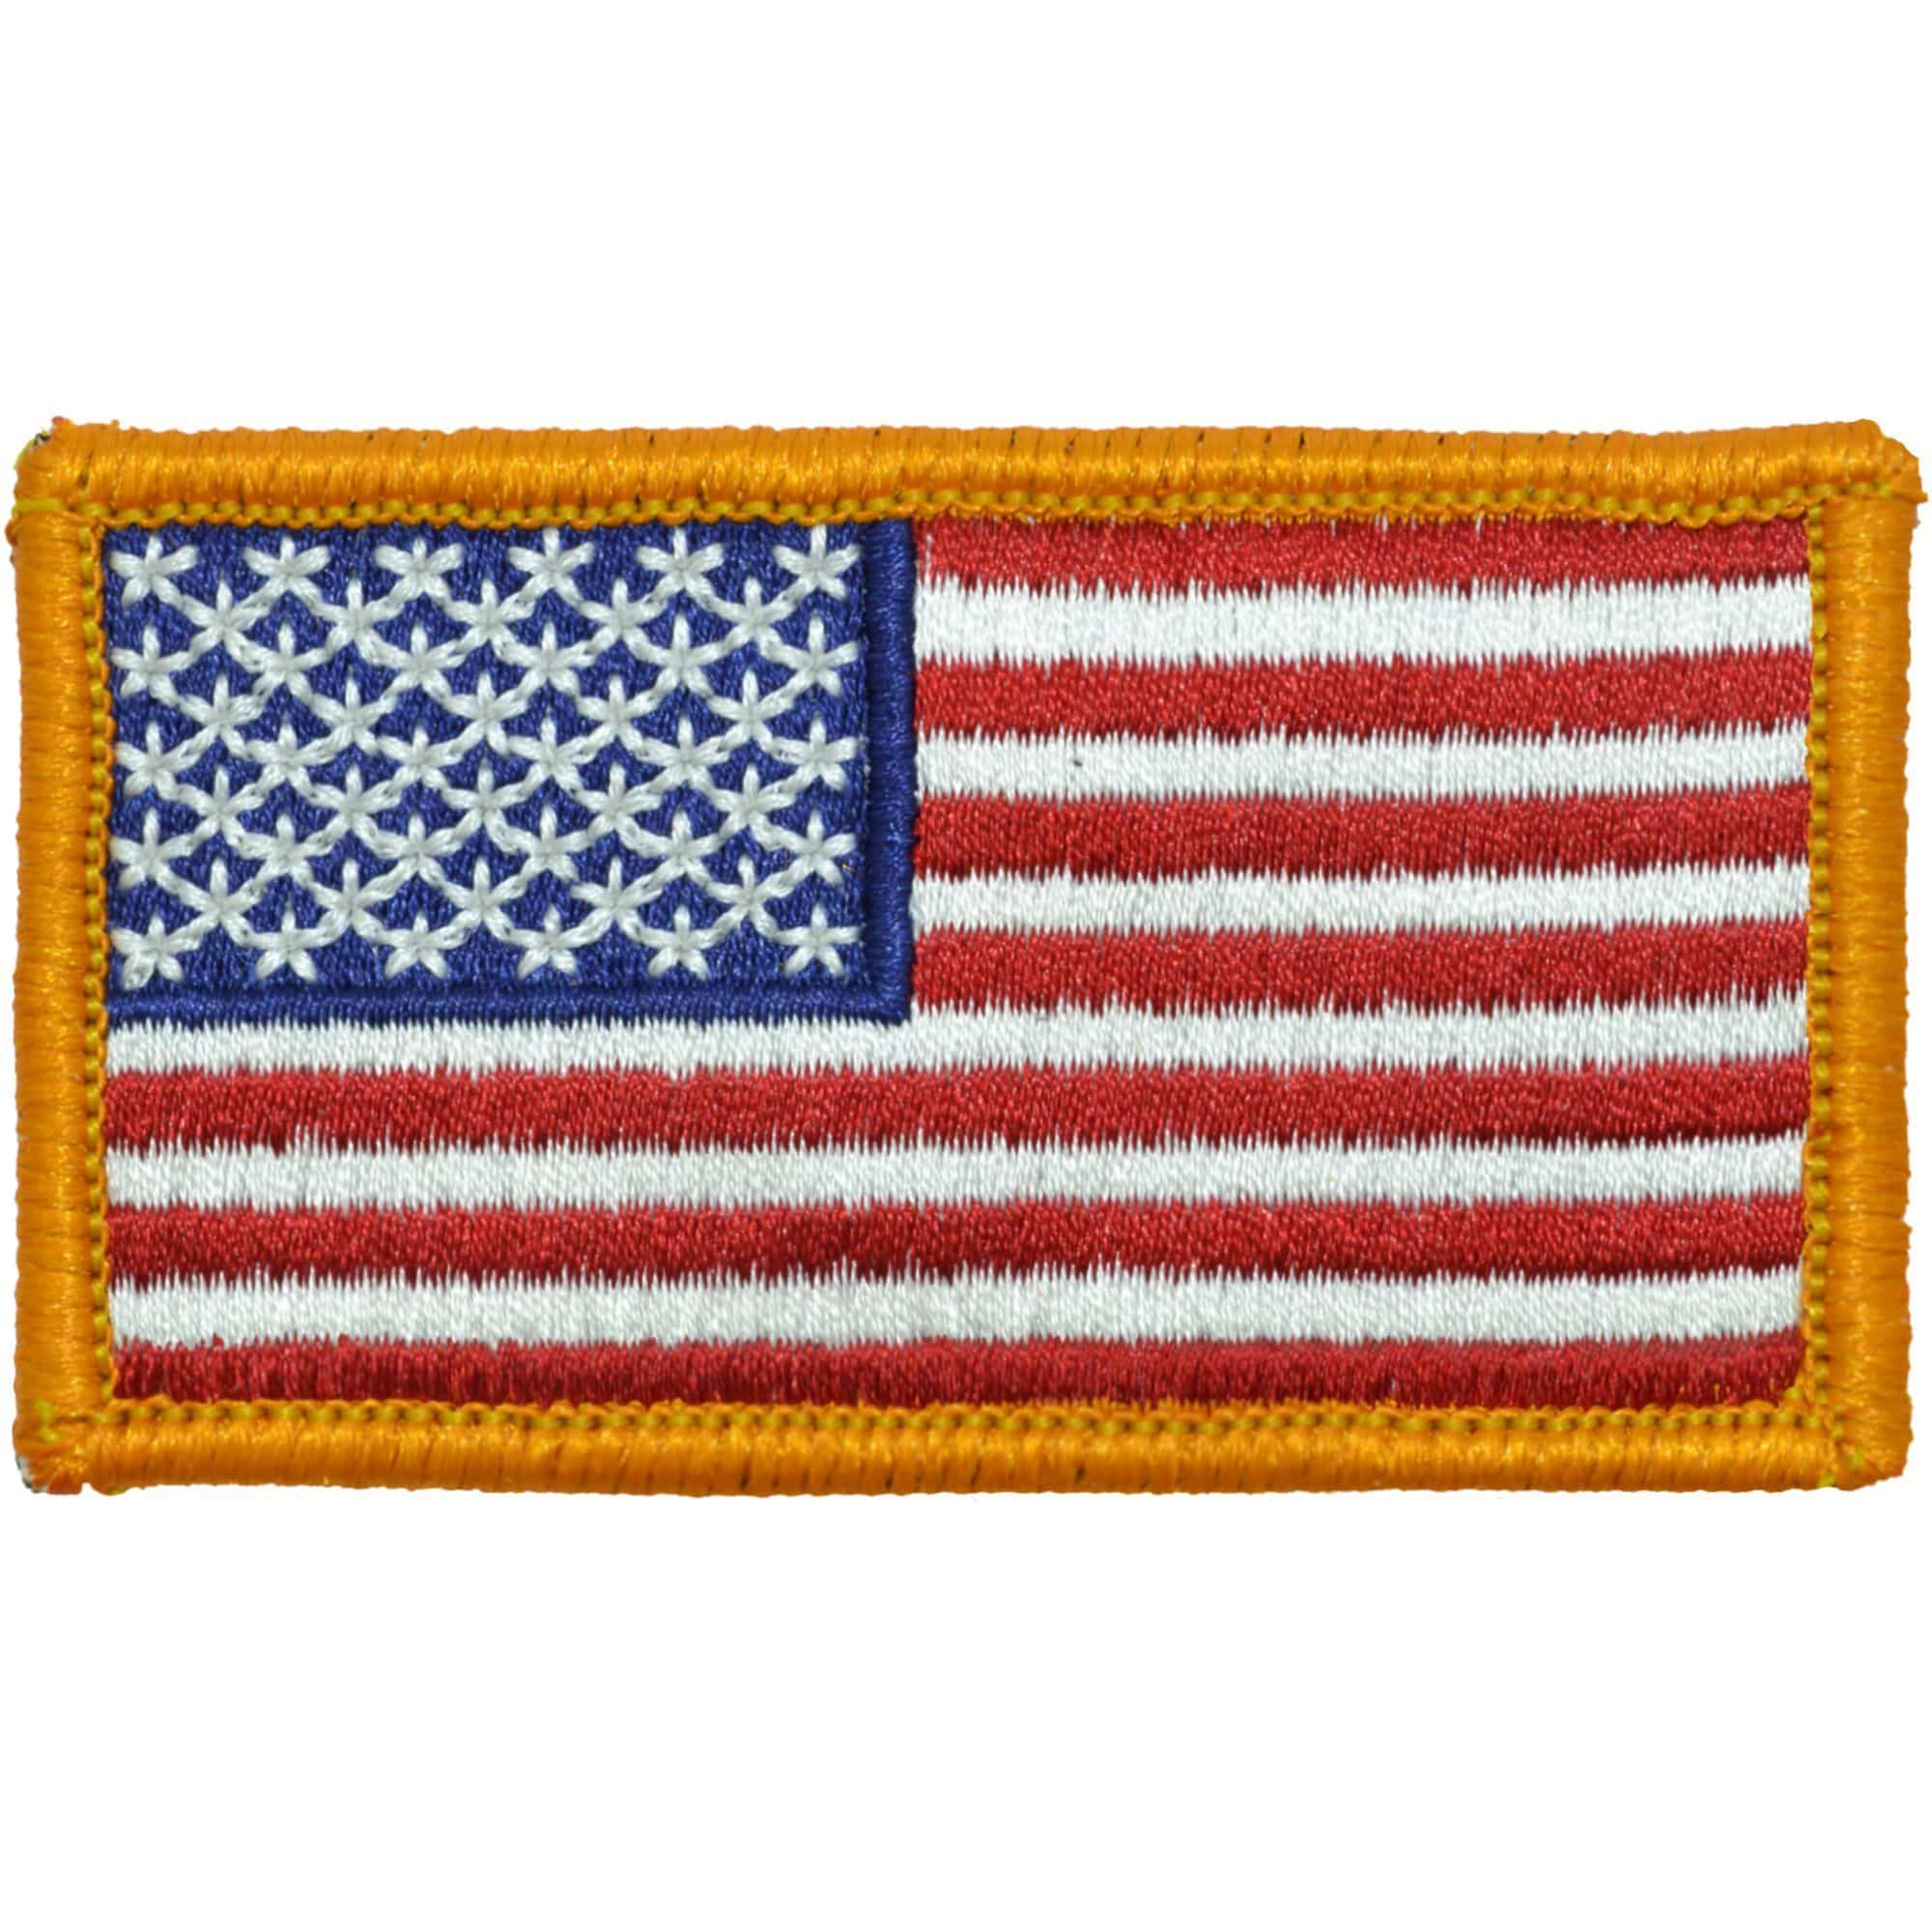  American Flag Patch,Patches Tactical,Full Embroidery